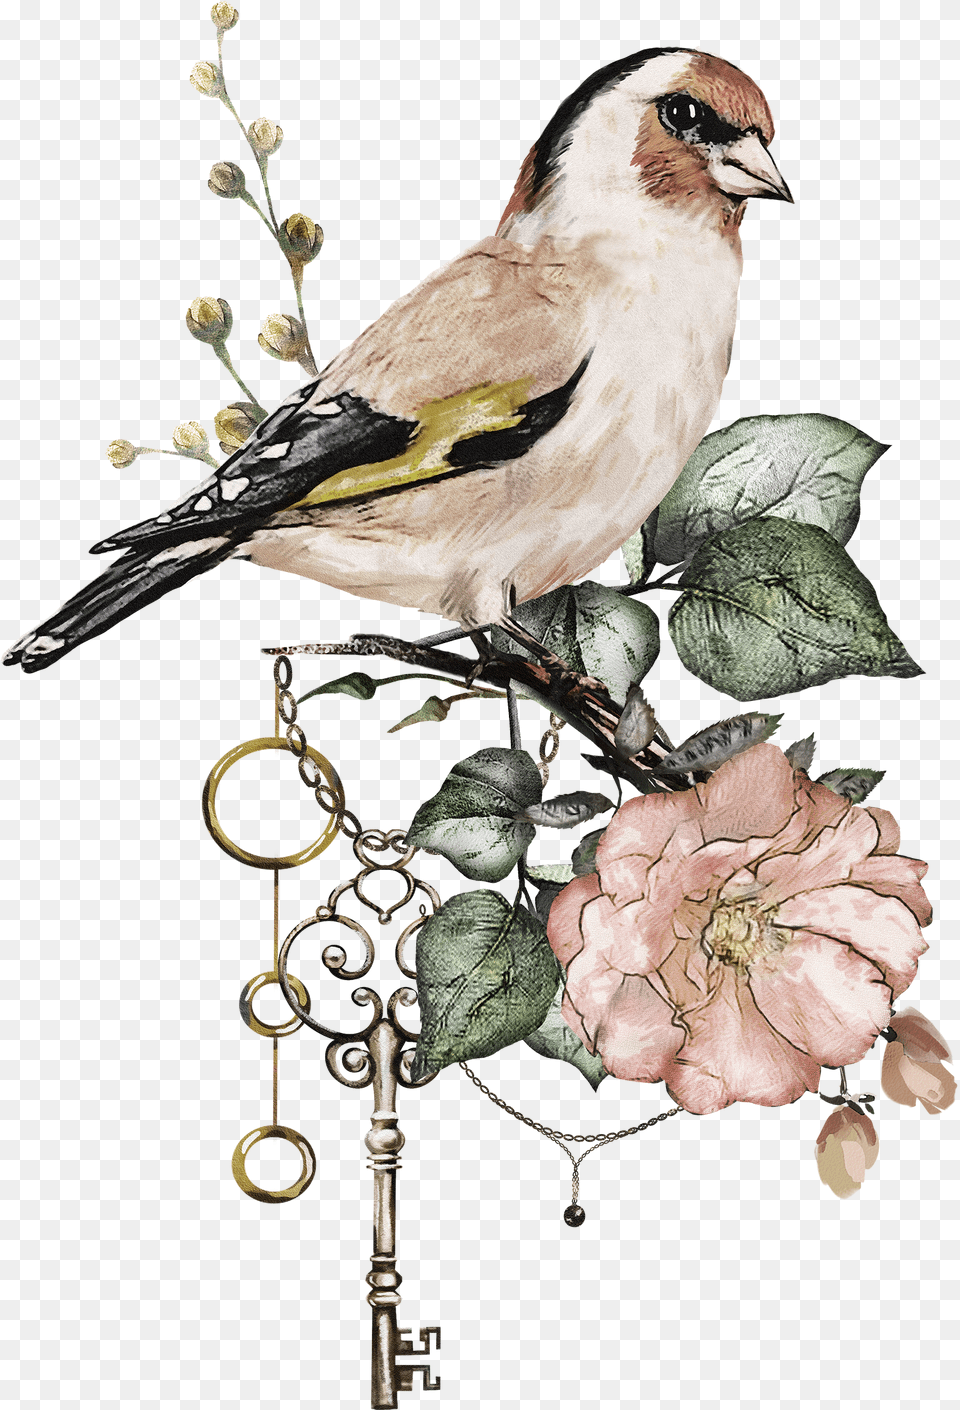 Watercolor Art Watercolor Flowers Bird Art Colorful Watercolor Painting, Animal, Finch, Flower, Plant Png